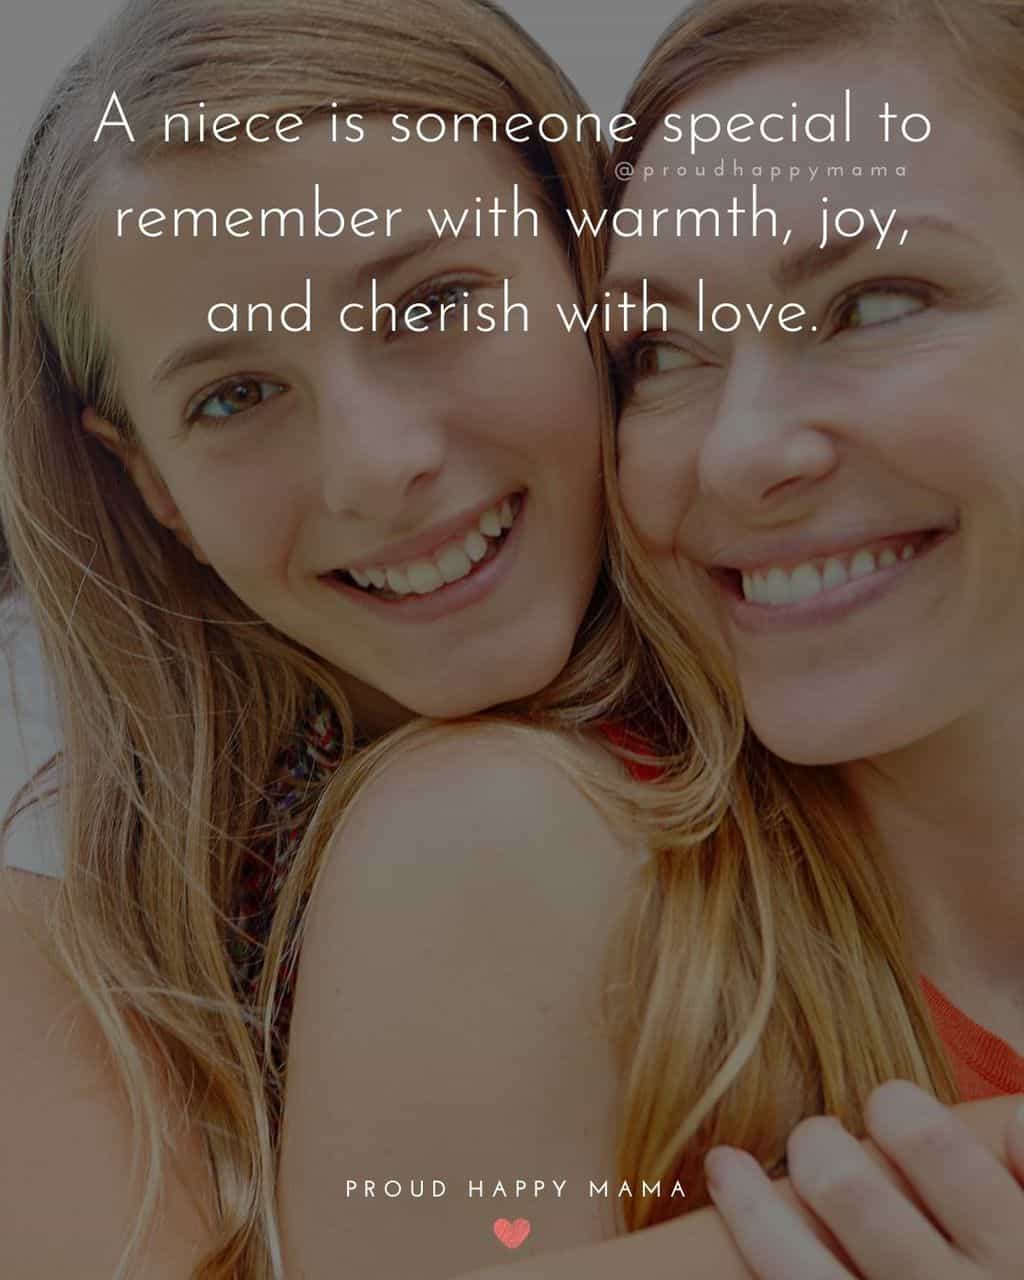 Niece Quotes - A niece is someone special to remember with warmth, joy, and cherish with love.